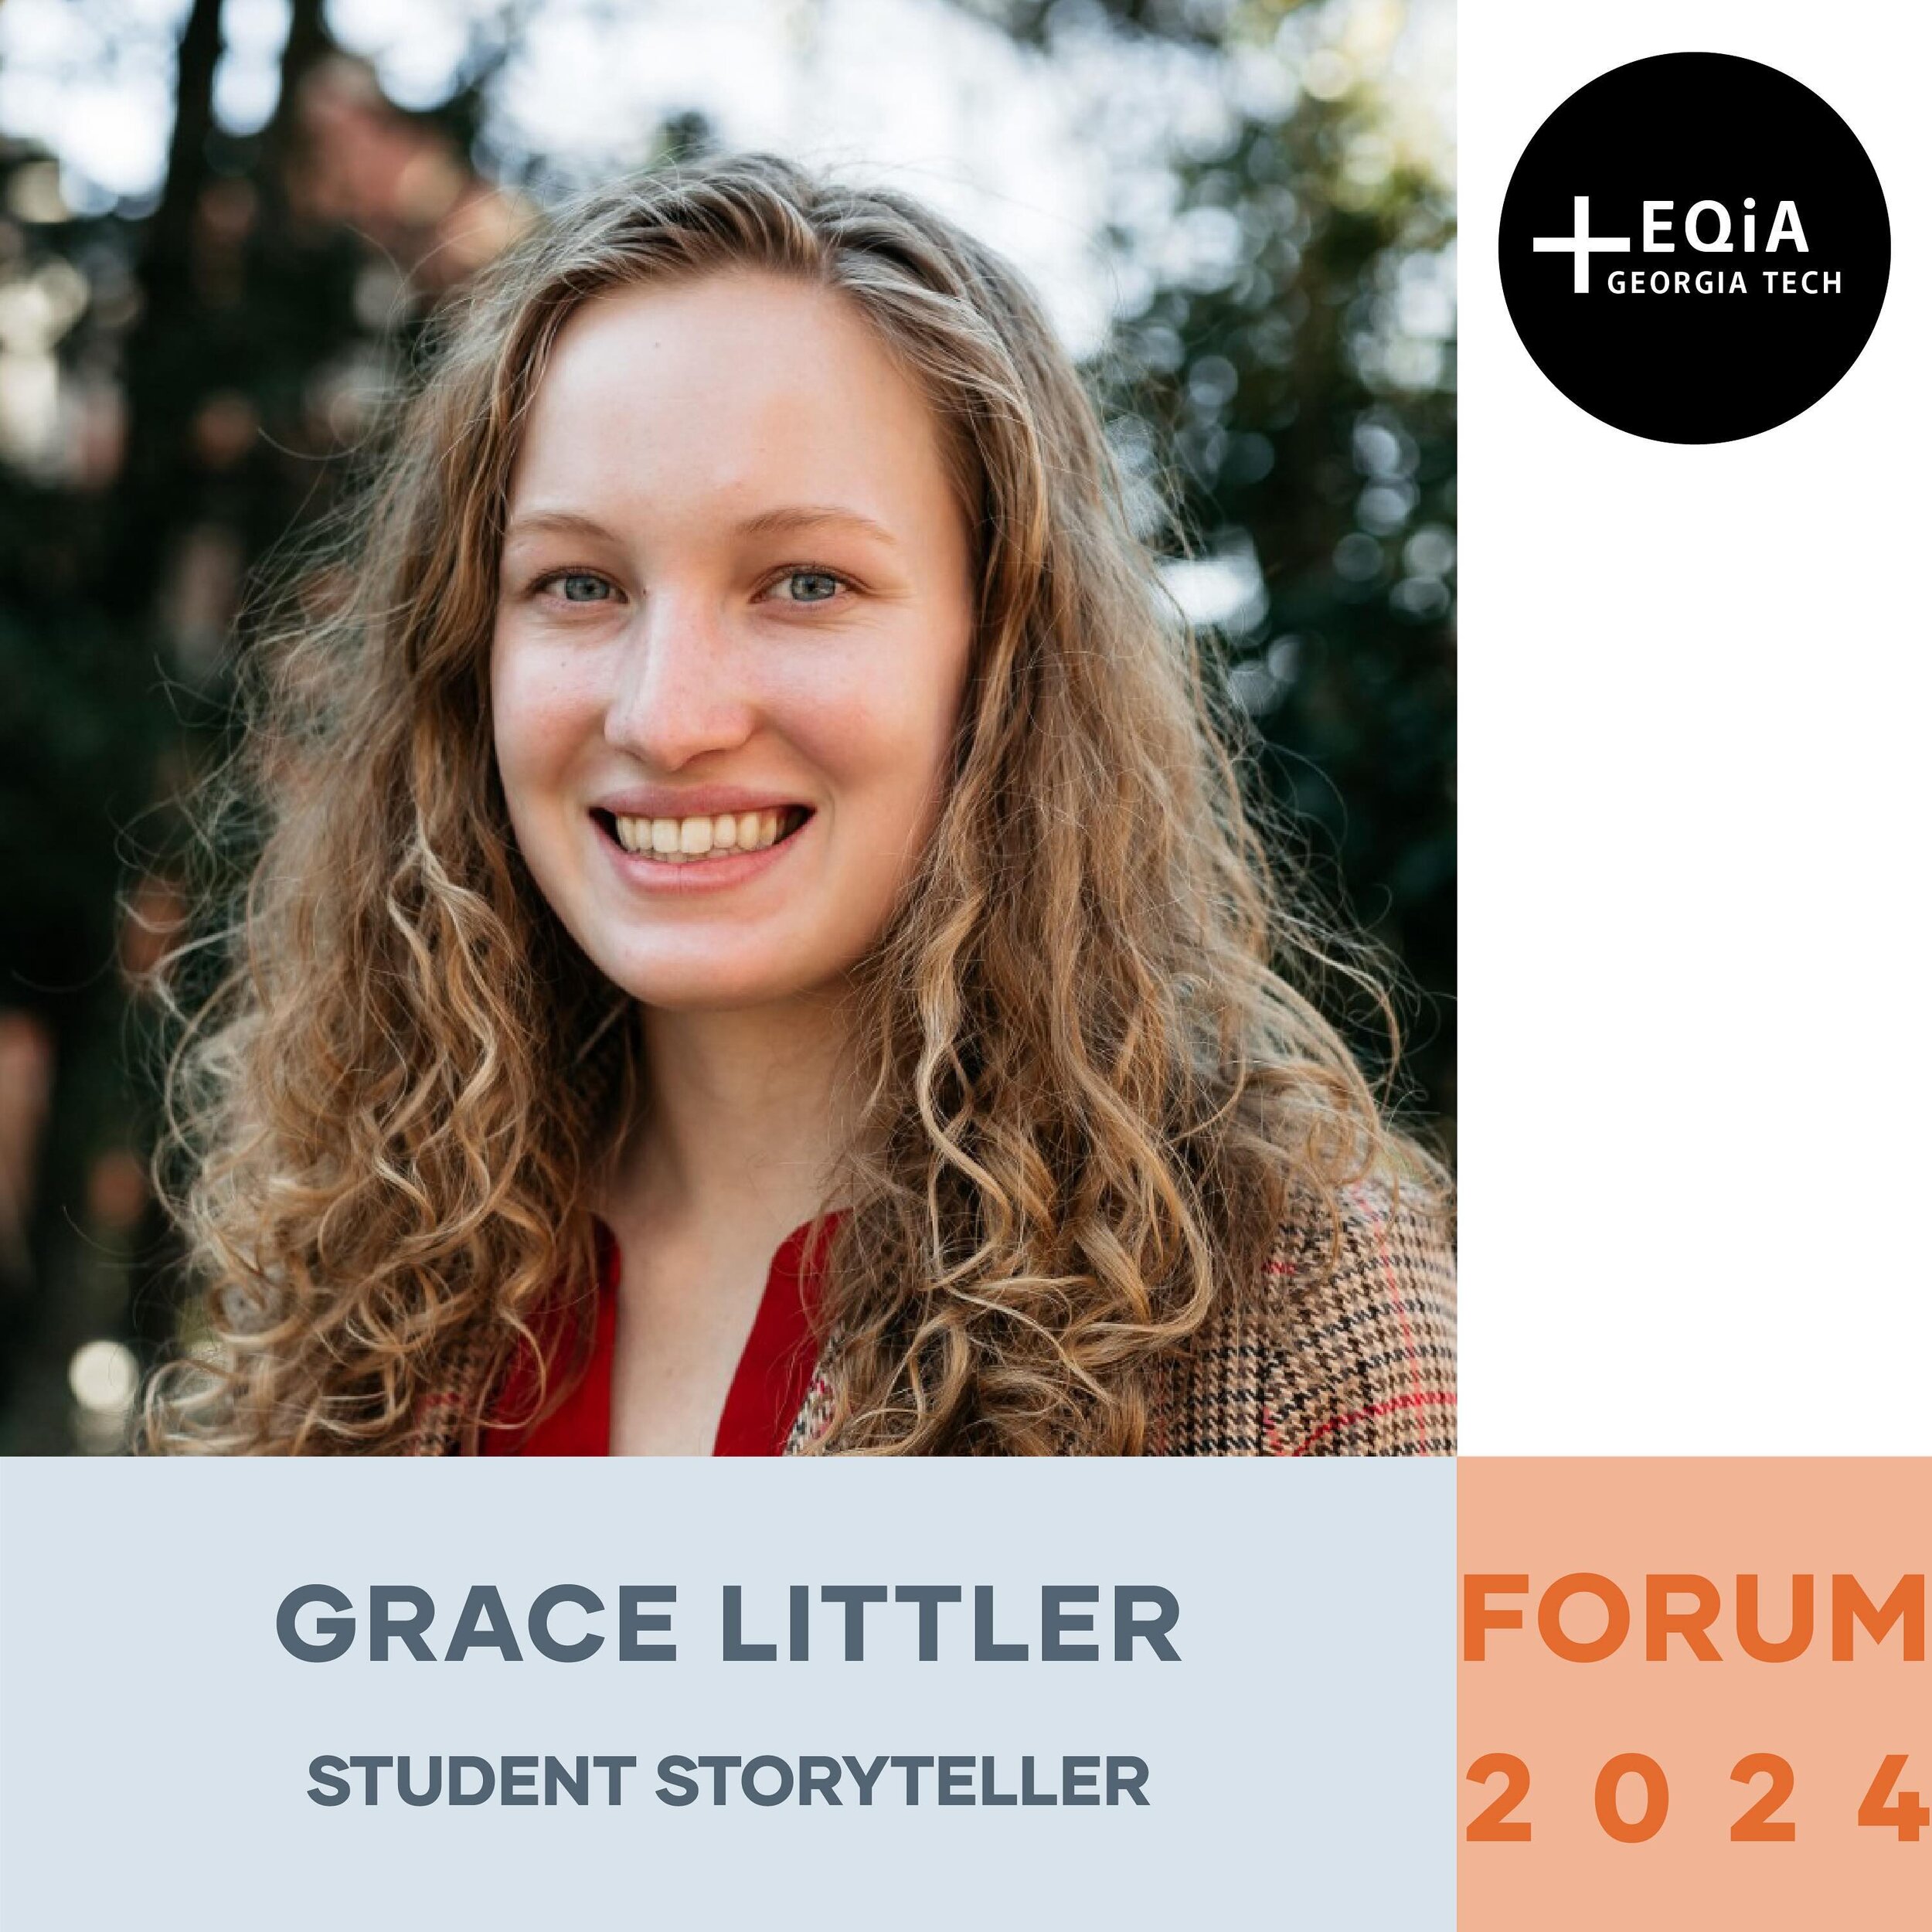 ⭐️ STUDENT STORYTELLER ⭐️ 
Grace is a second-year undergraduate architecture student passionate about accessible design due to her own lived experiences. Through her work as an undergraduate research assistant with Simtigrate Design Lab, she strives 